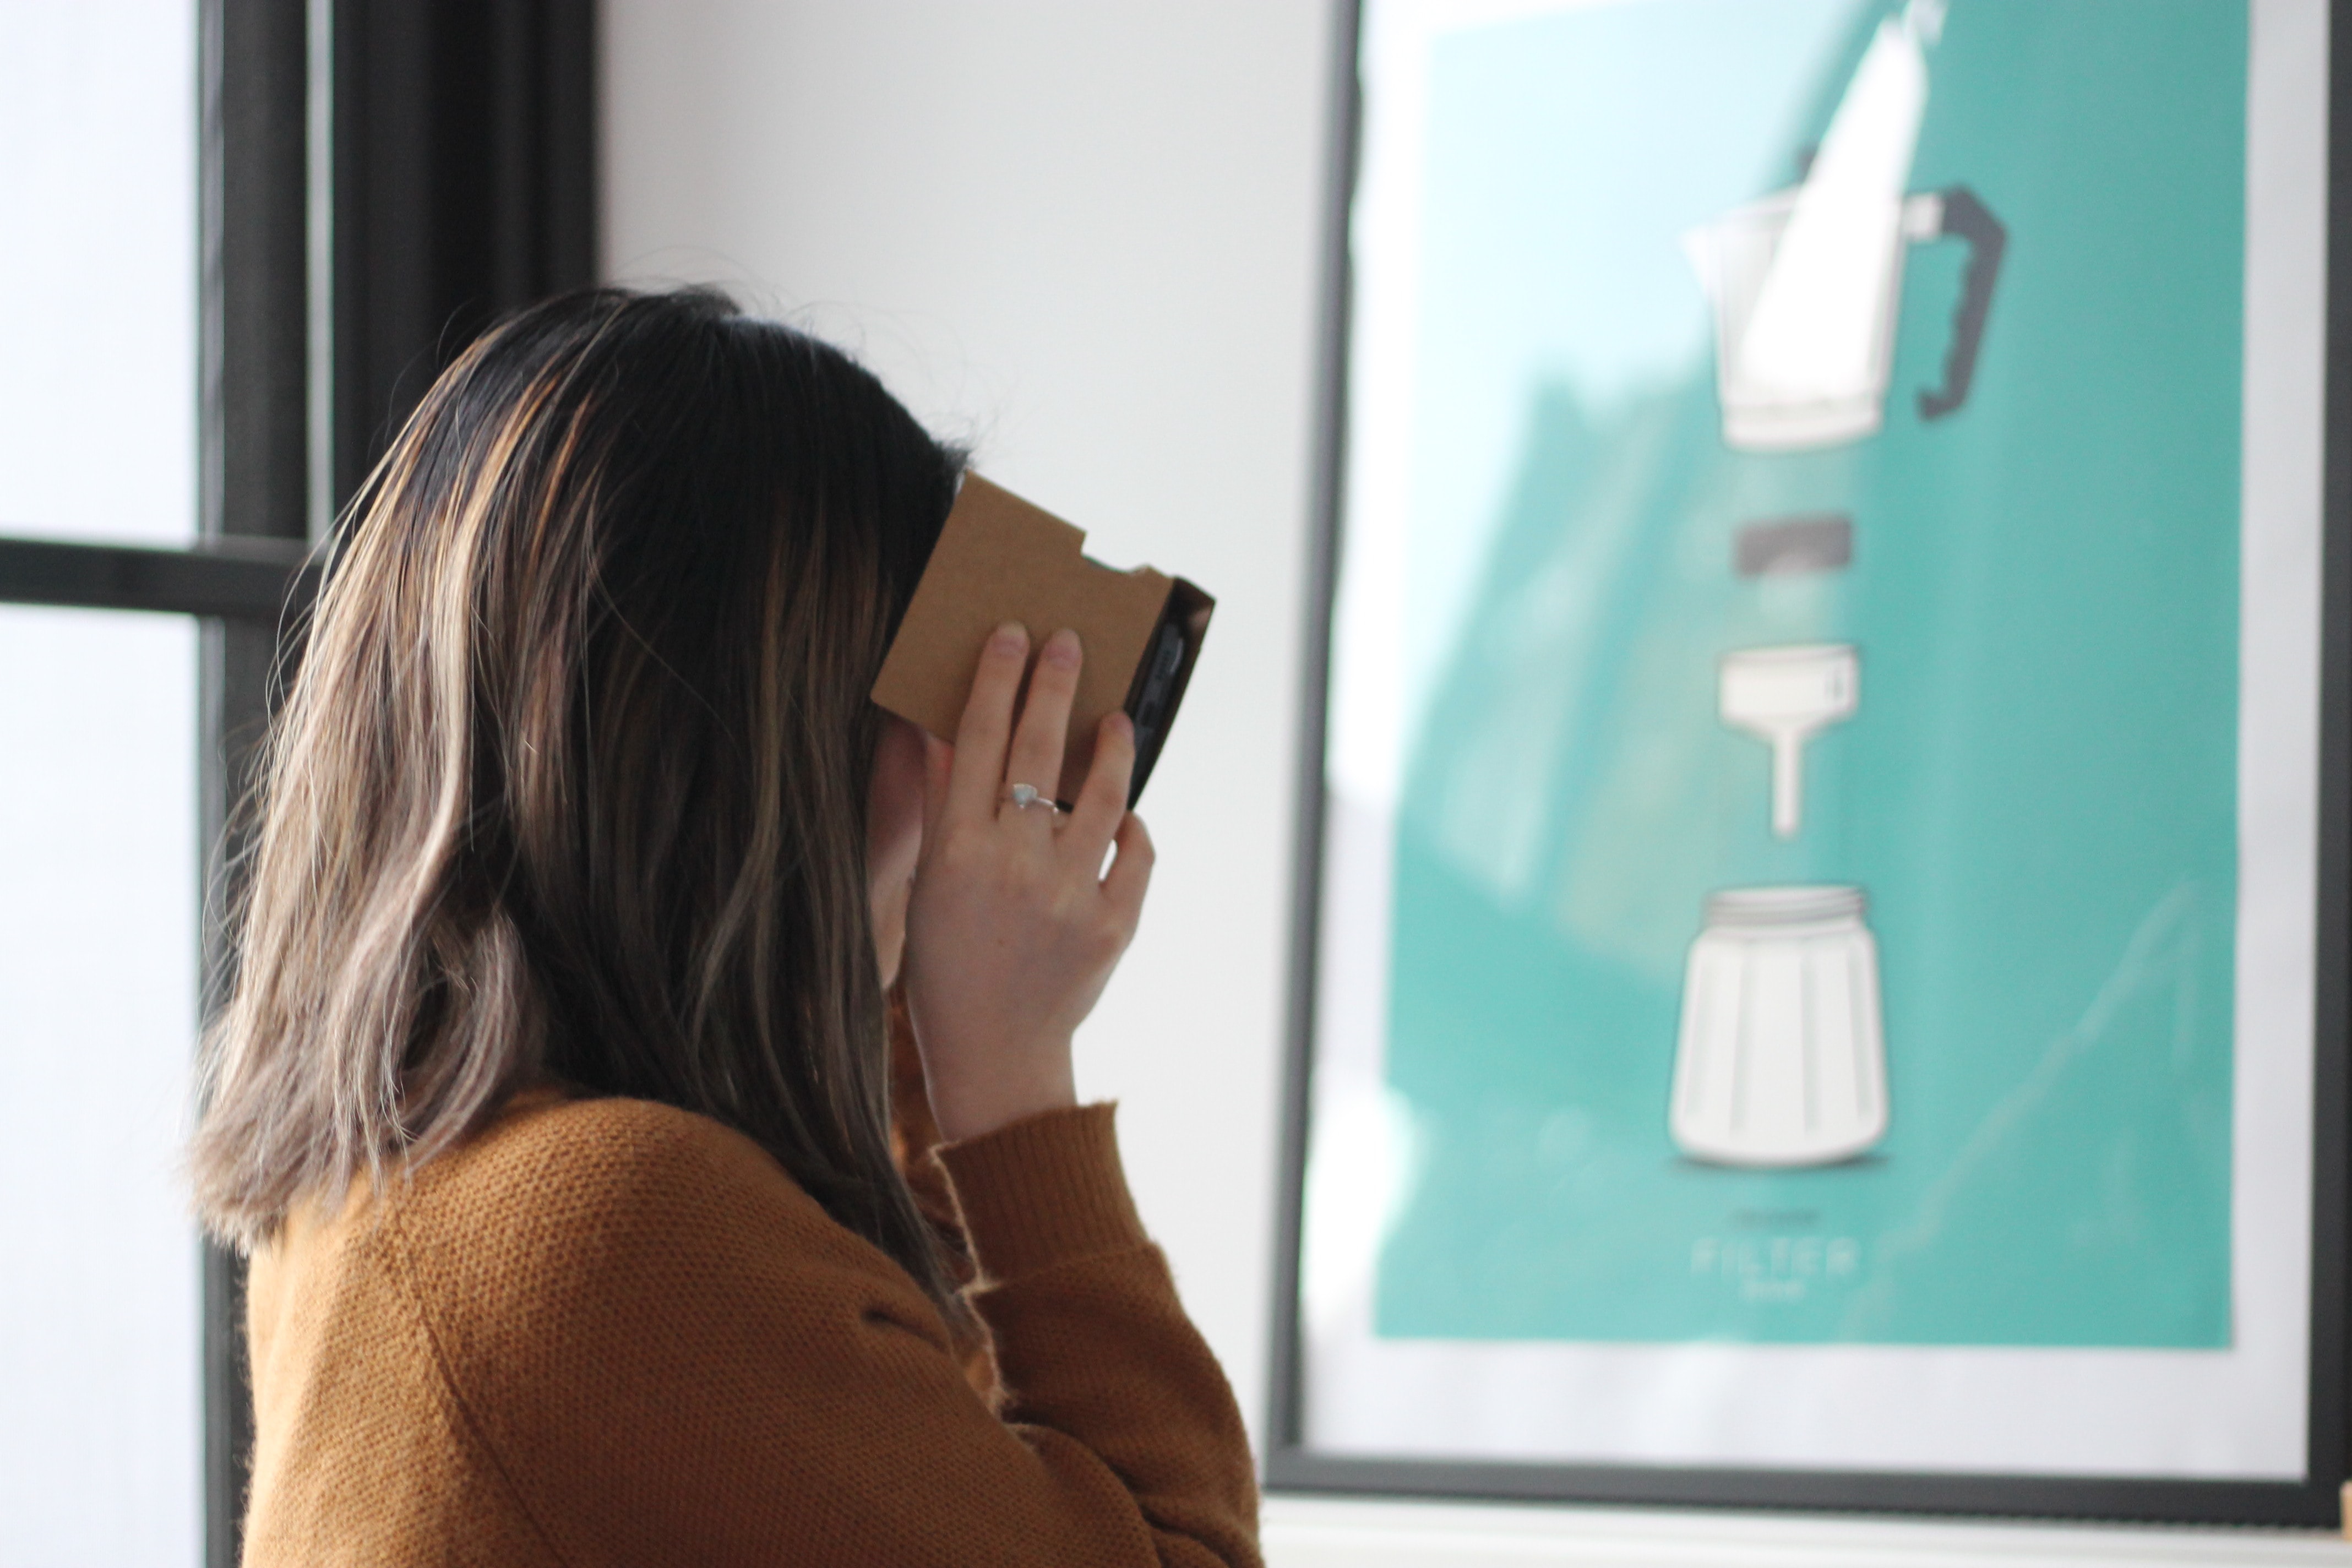 Virtual reality can help marketing in showing the benefits of a product in a greater way than some of the methods we've been using up until today.